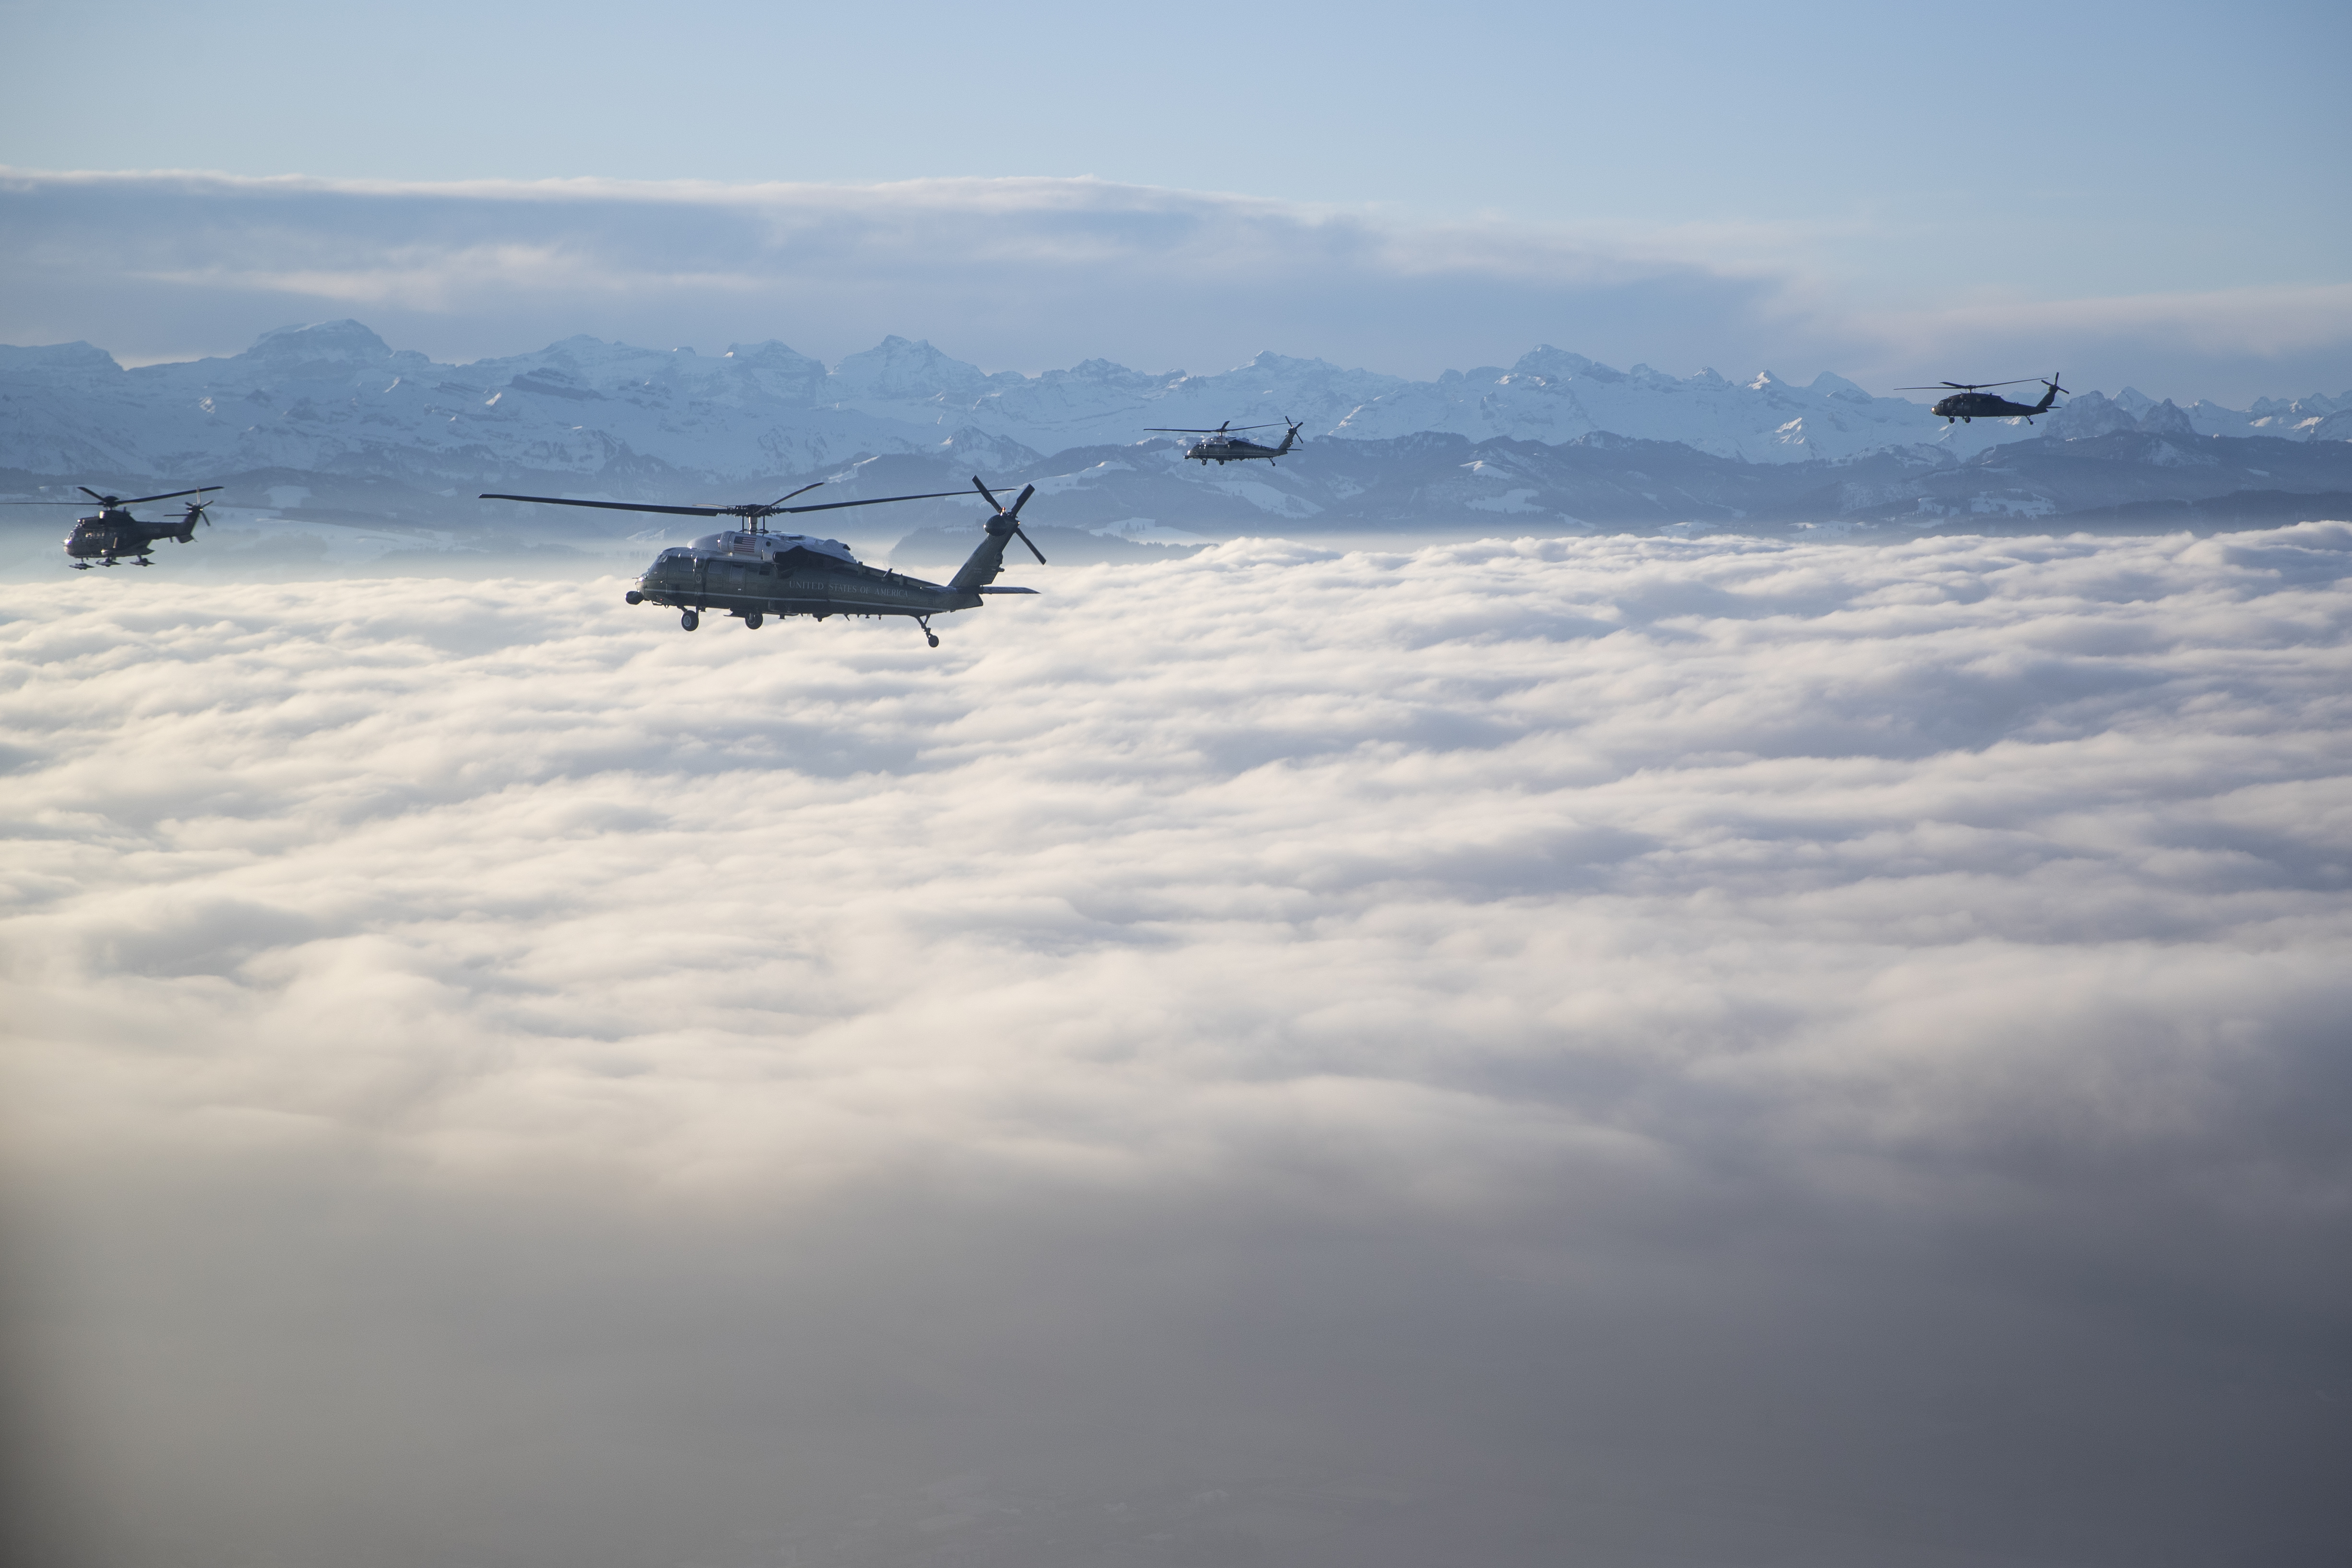 Marine One carrying US President Donald Trump travels to the Davos landing zone in Switzerland, Tuesday, Jan. 21, 2020. President Trump arrived in Switzerland on Tuesday to start a two-day visit to the World Economic Forum. (AP Photo/Evan Vucci)